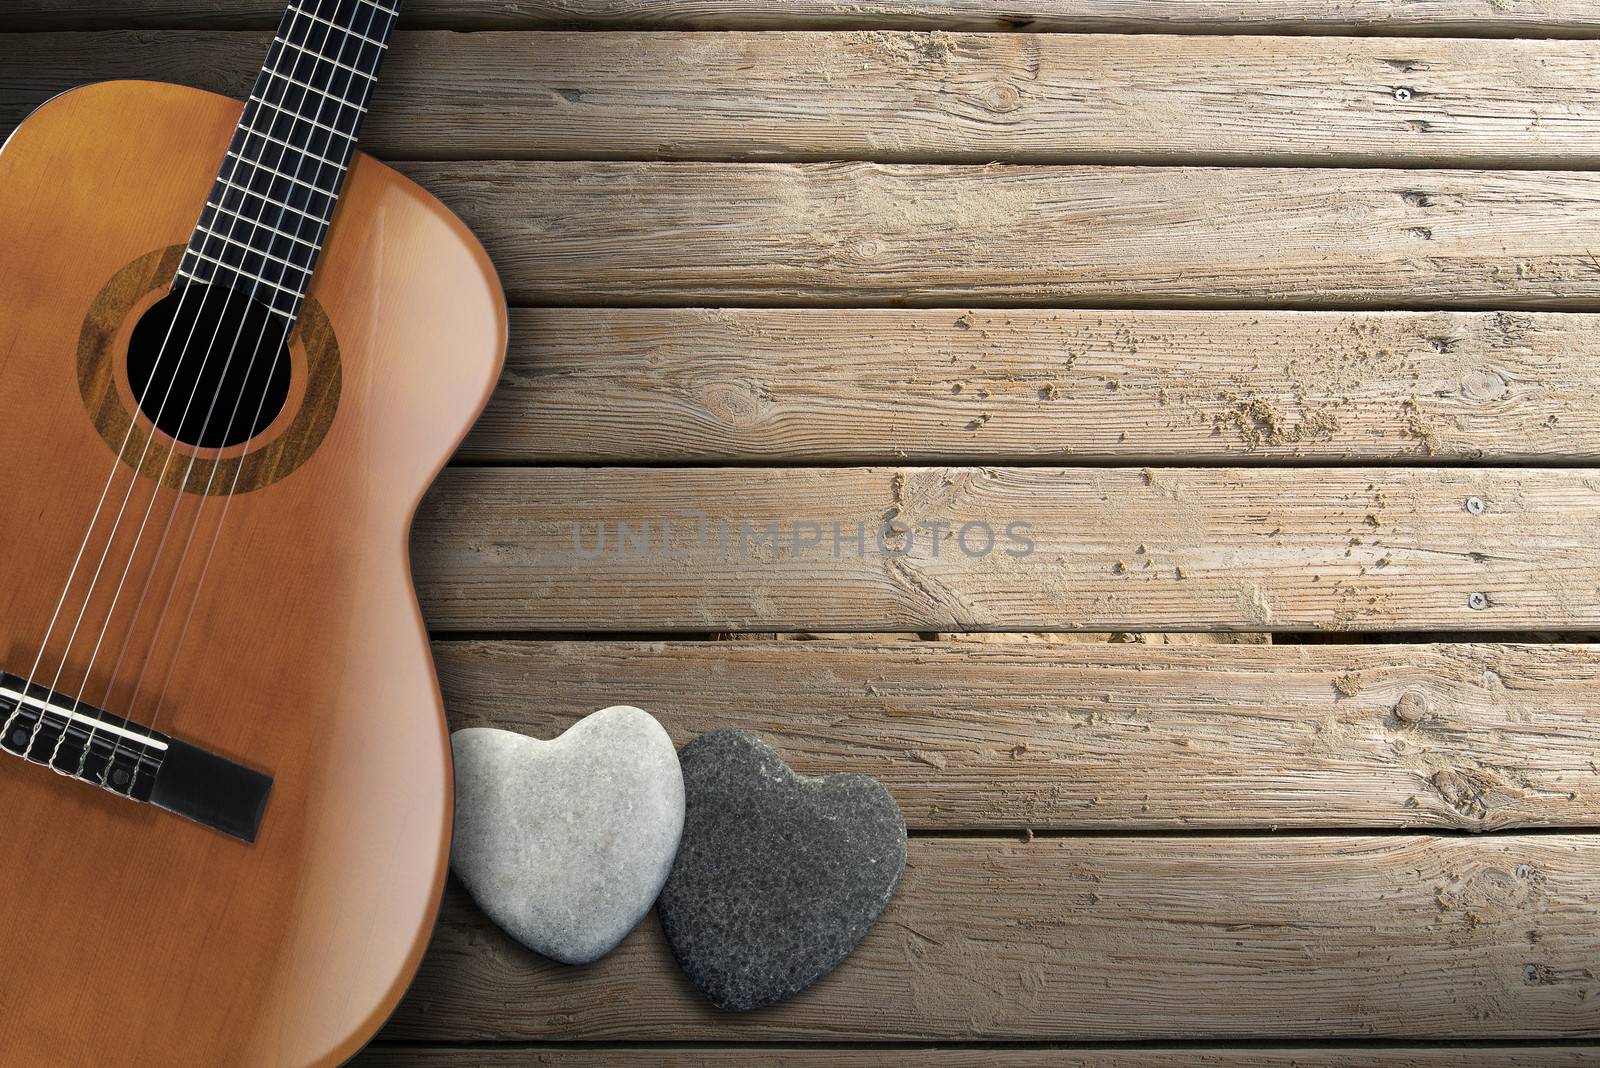 Acoustic Guitar on Wooden Boardwalk by catalby